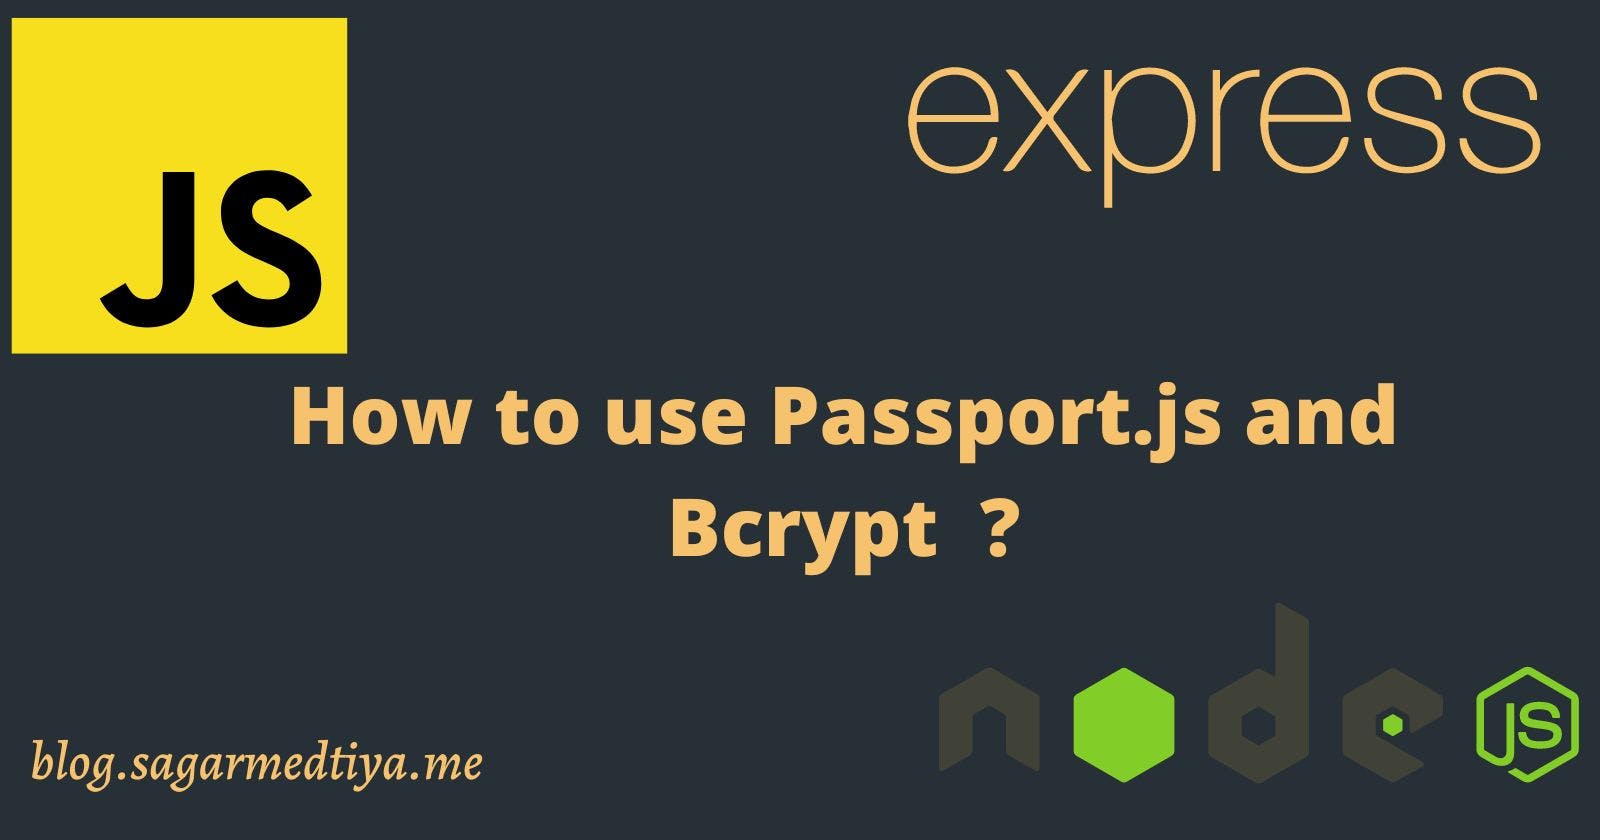 Meet my latest project, I built User Authentication using Passport.js and Bcrypt🎉